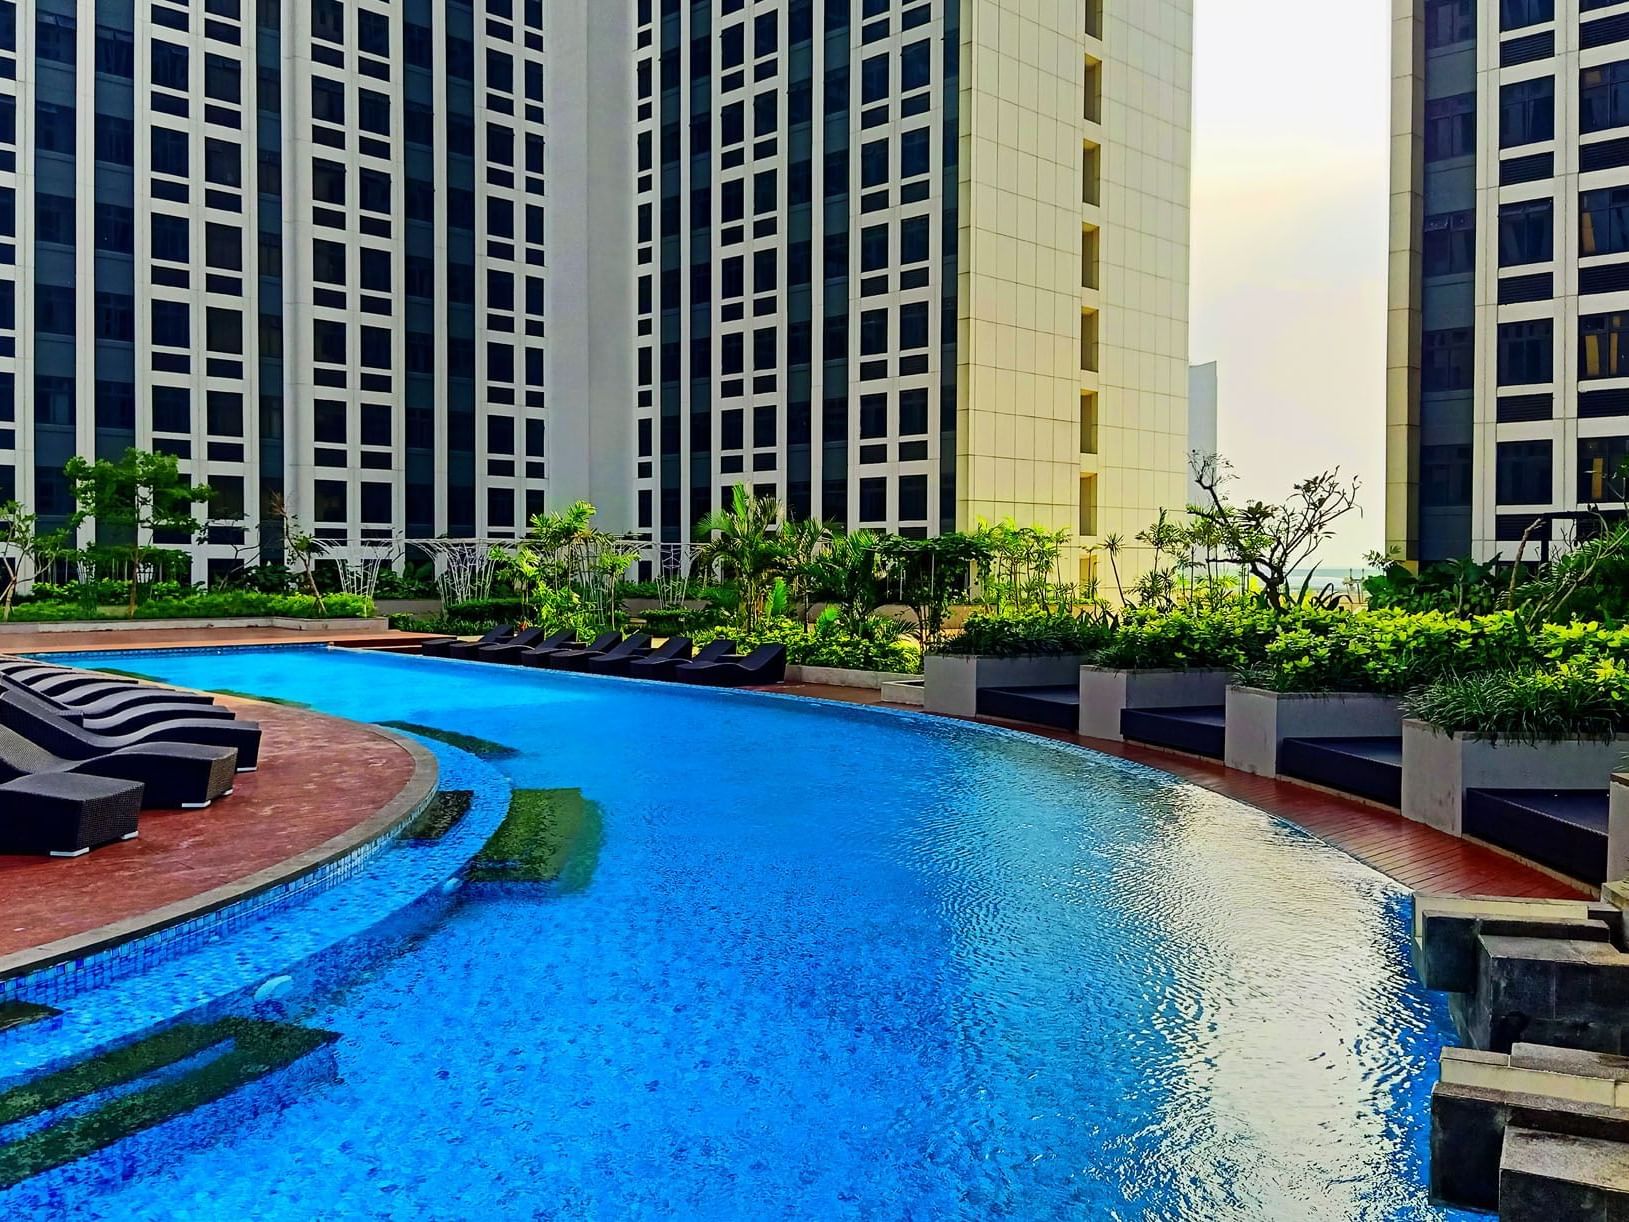 Outdoor swimming pool by the hotel buildings at LK Cikarang Hotel & Residences